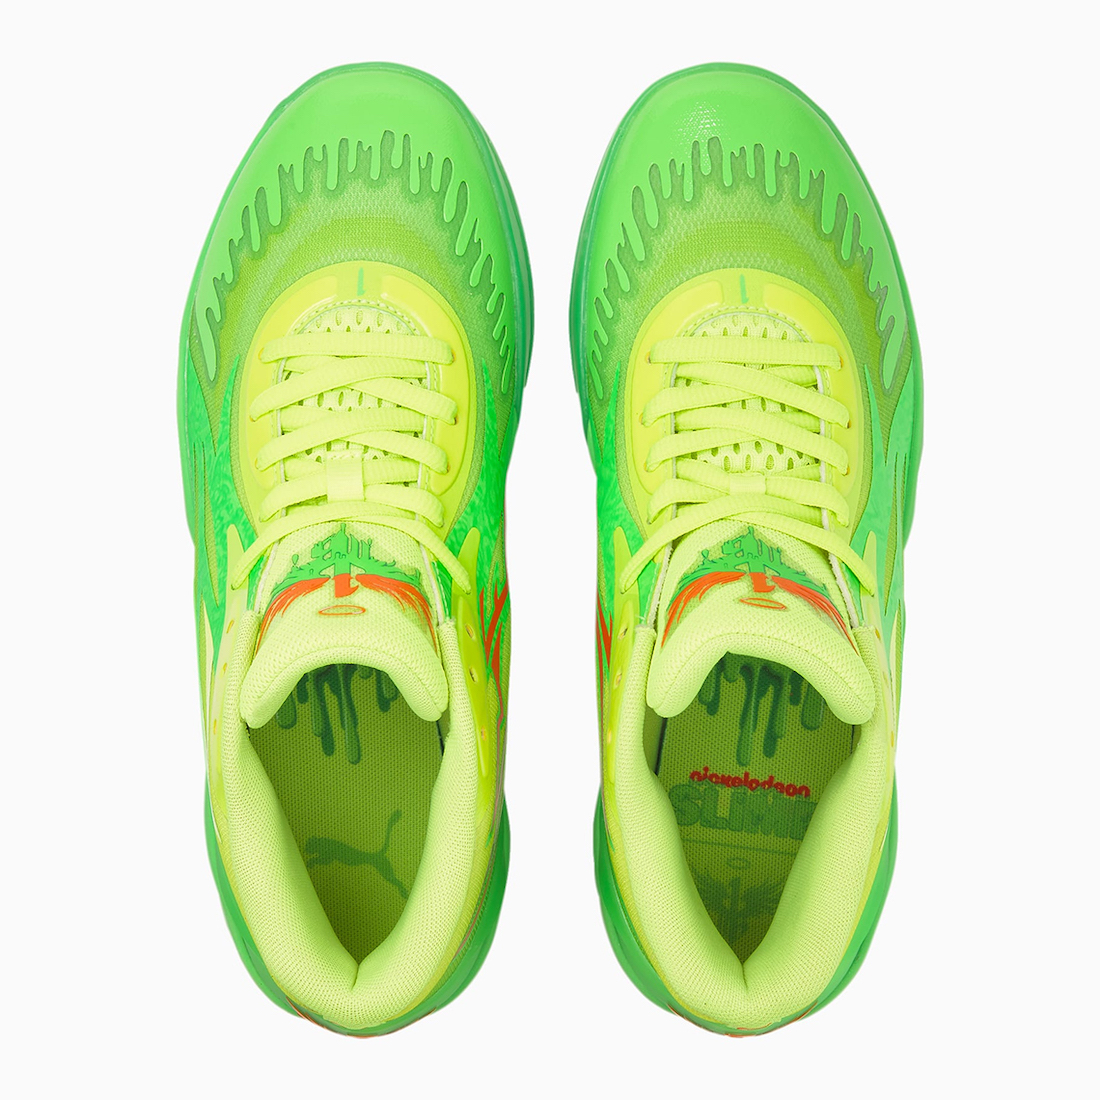 Nickelodeon Puma MB.02 Slime 377584-01 Release Date Lateral